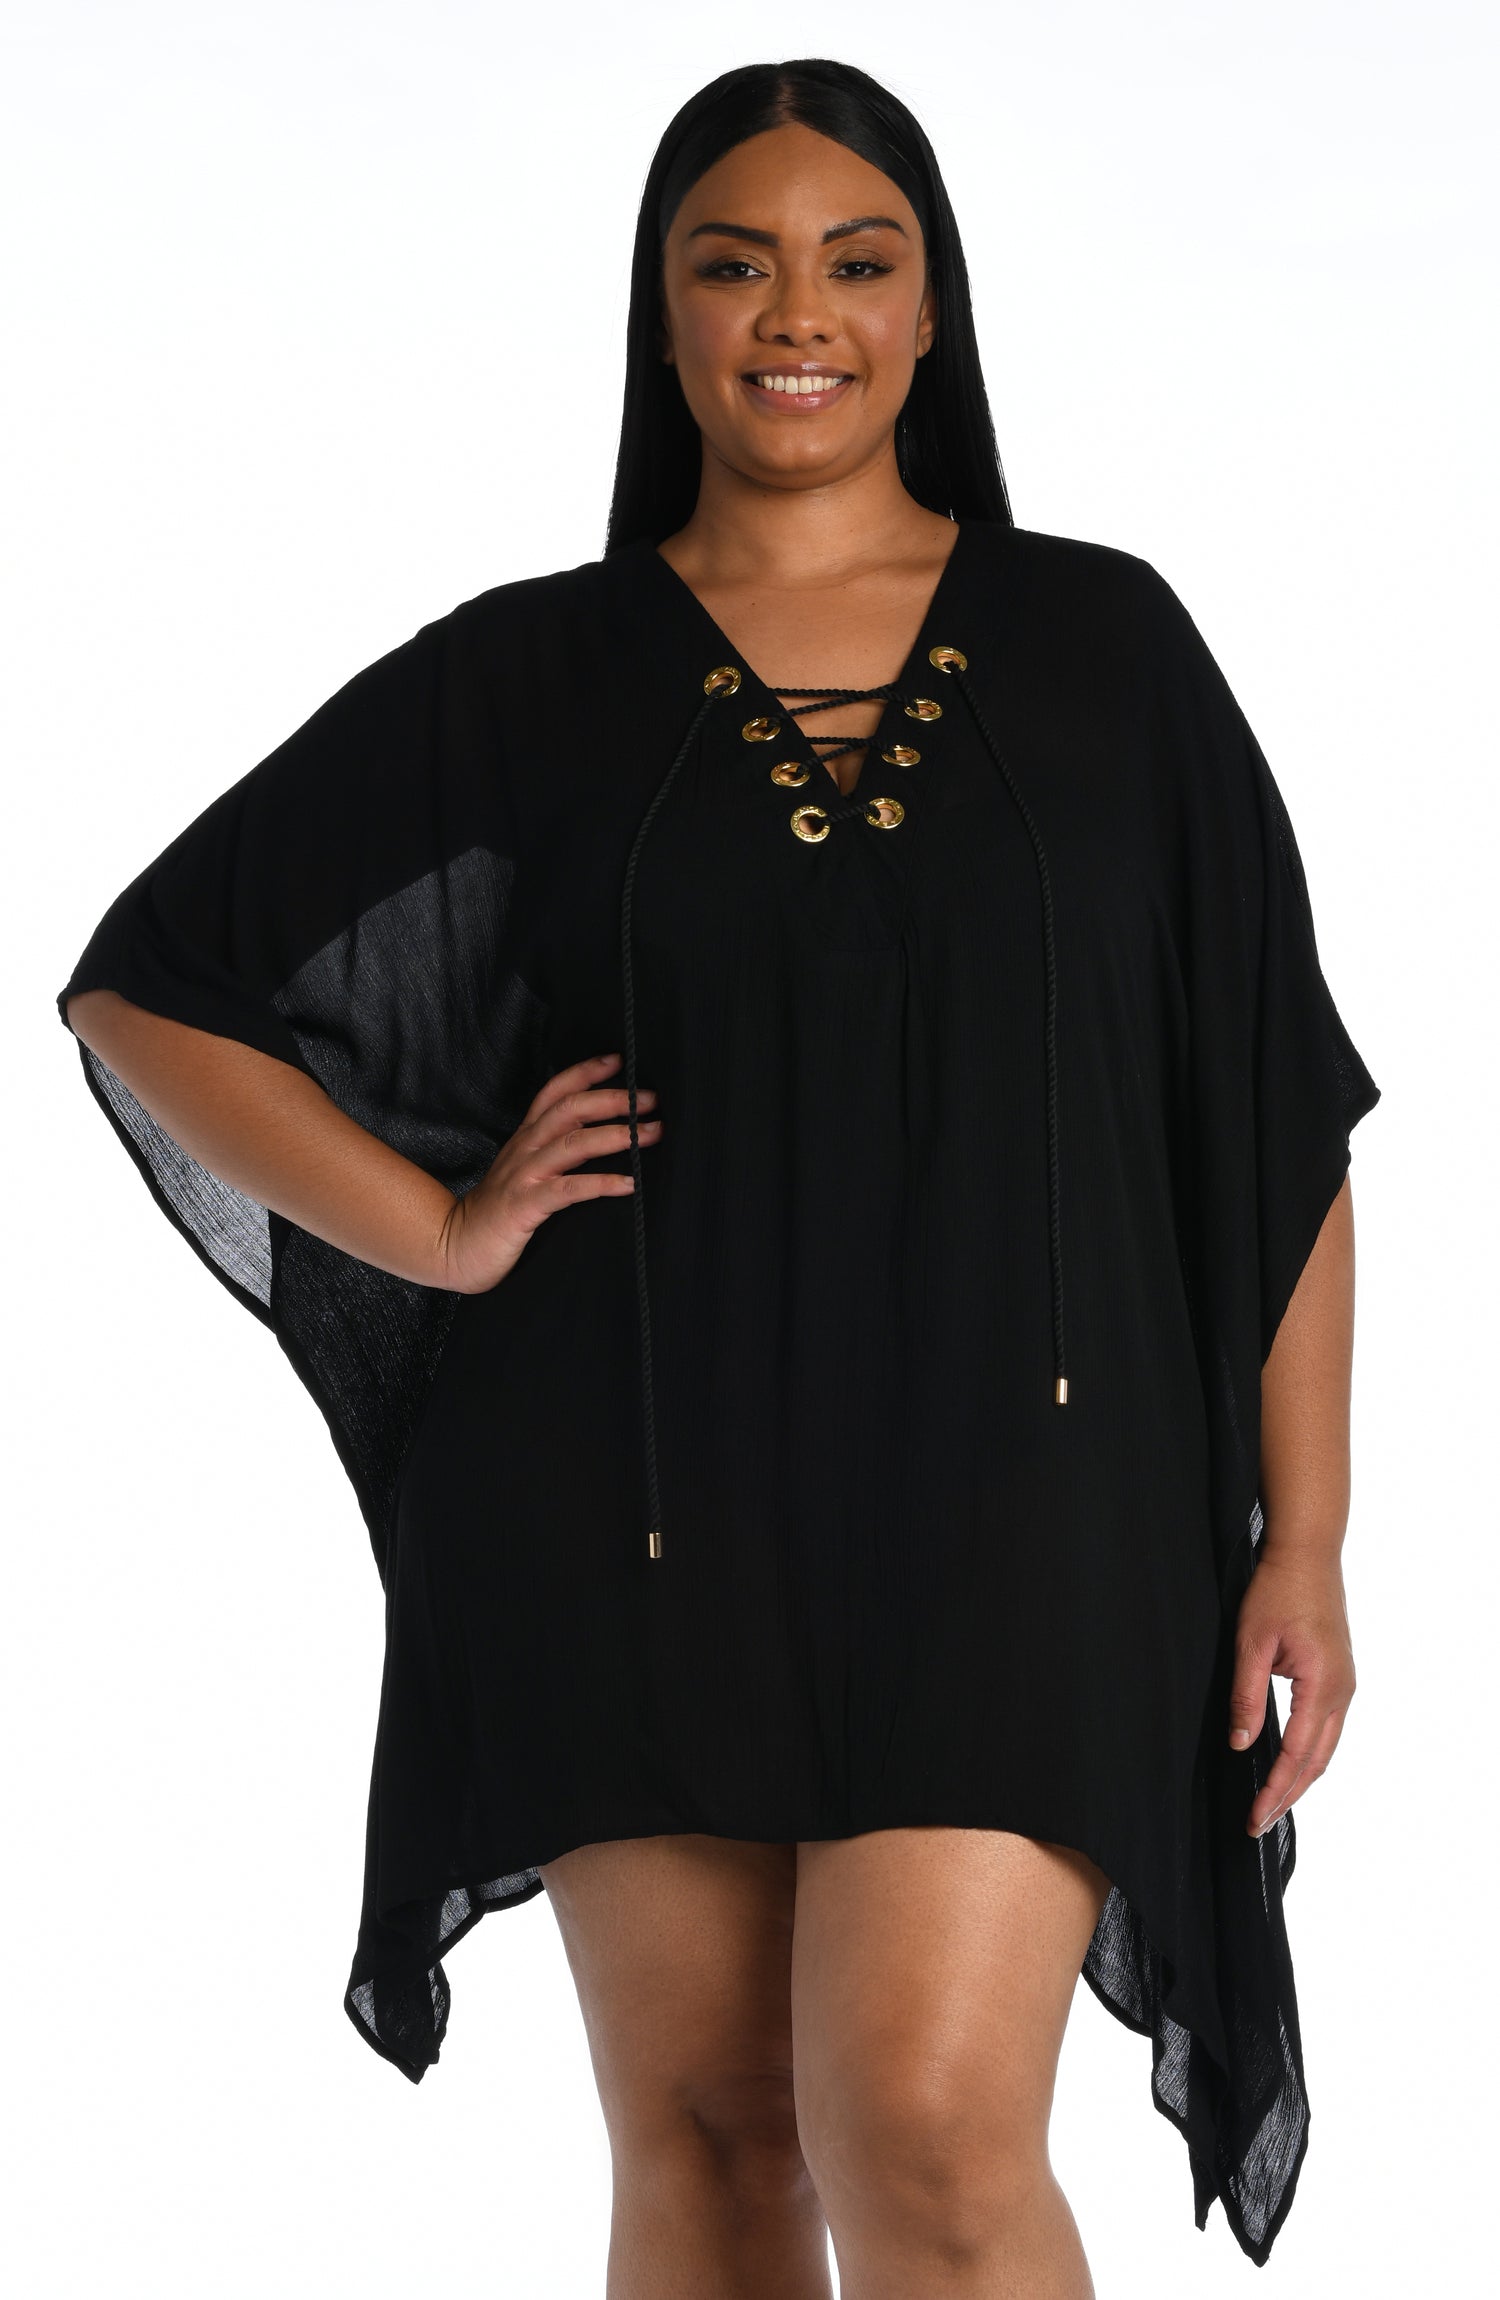 Model is wearing a black colored lace front caftan cover up fom our Apulia Mix collection.